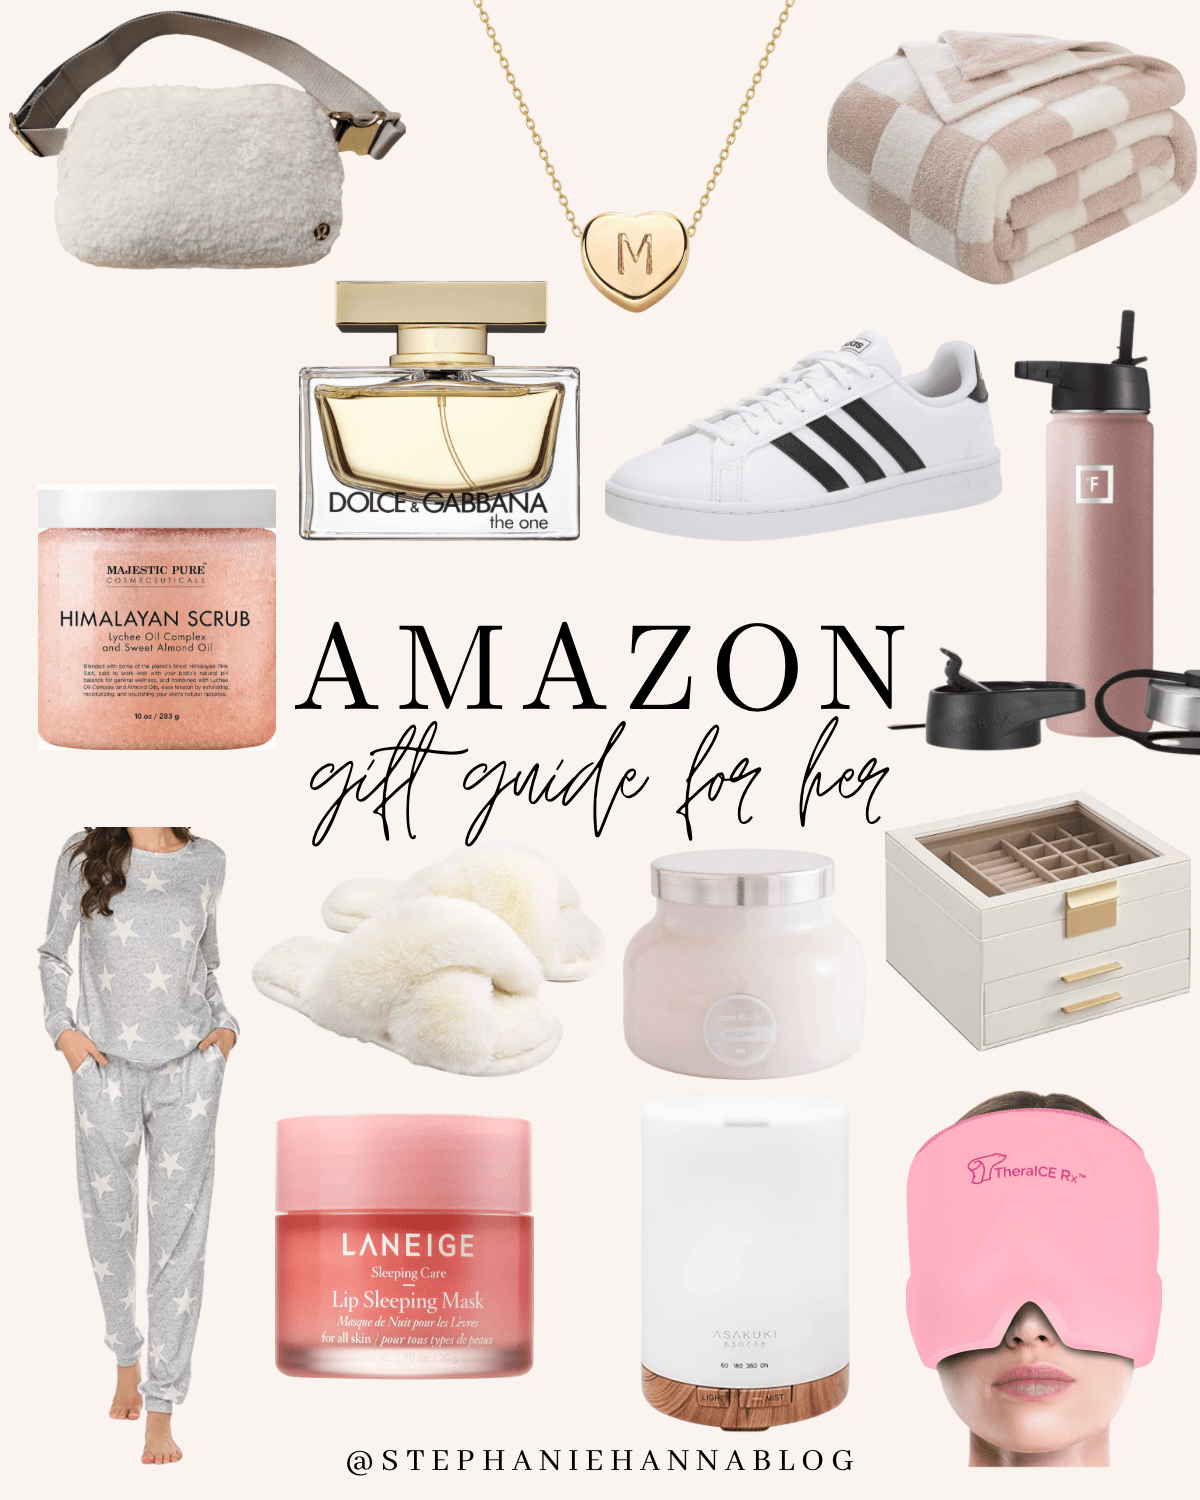 60 Christmas Gift Ideas for Her 2022 - Unique Gifts for Her